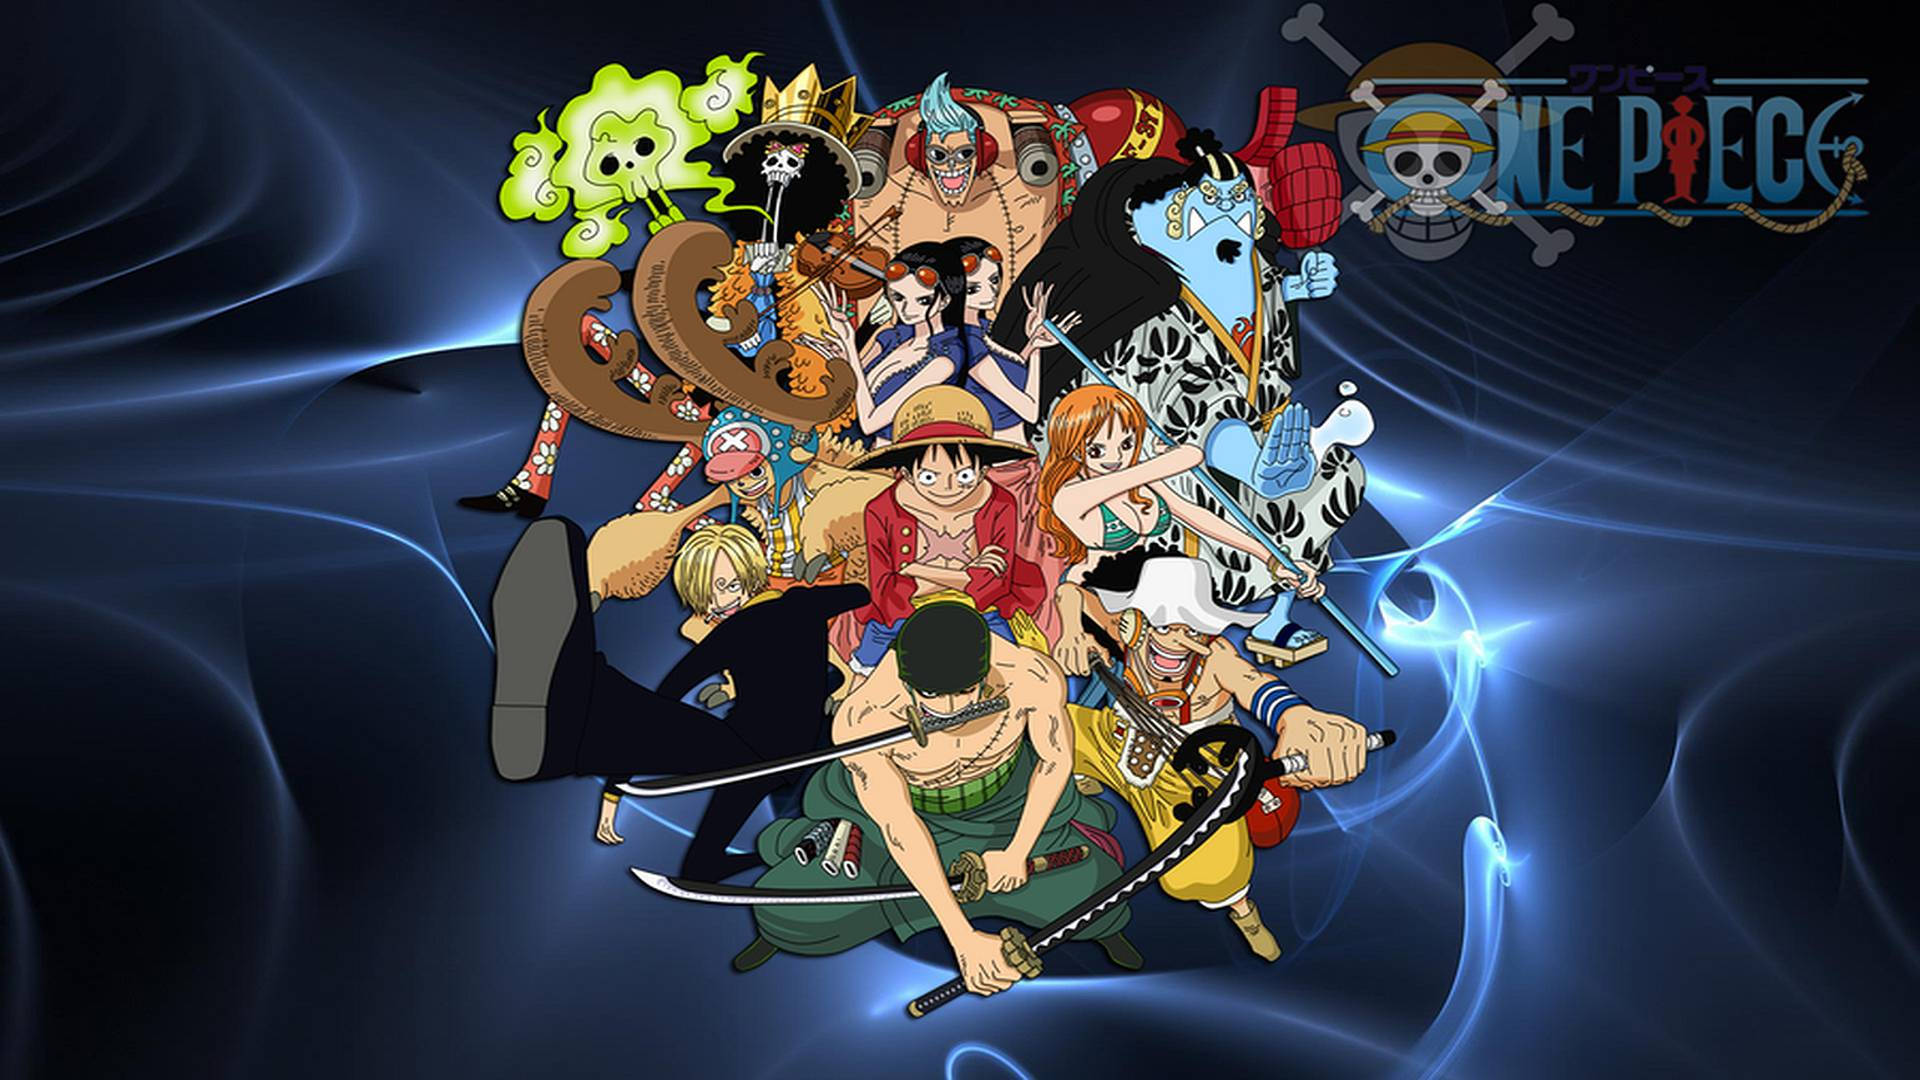 Luffy And The Strawhat Pirates - The Legendary Adventure Through The Grand Line Begins